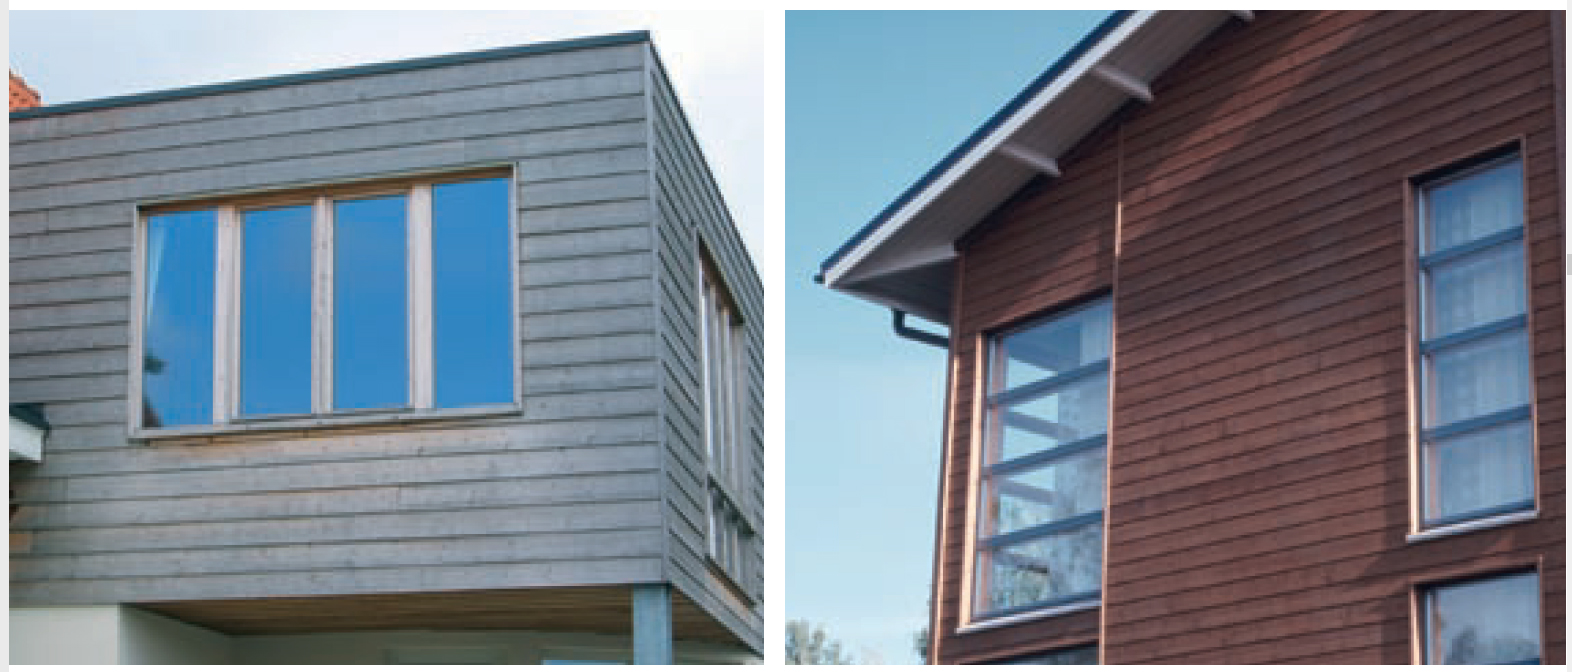 ThermoWood cladding after three years weather exposure with and without surface coatings